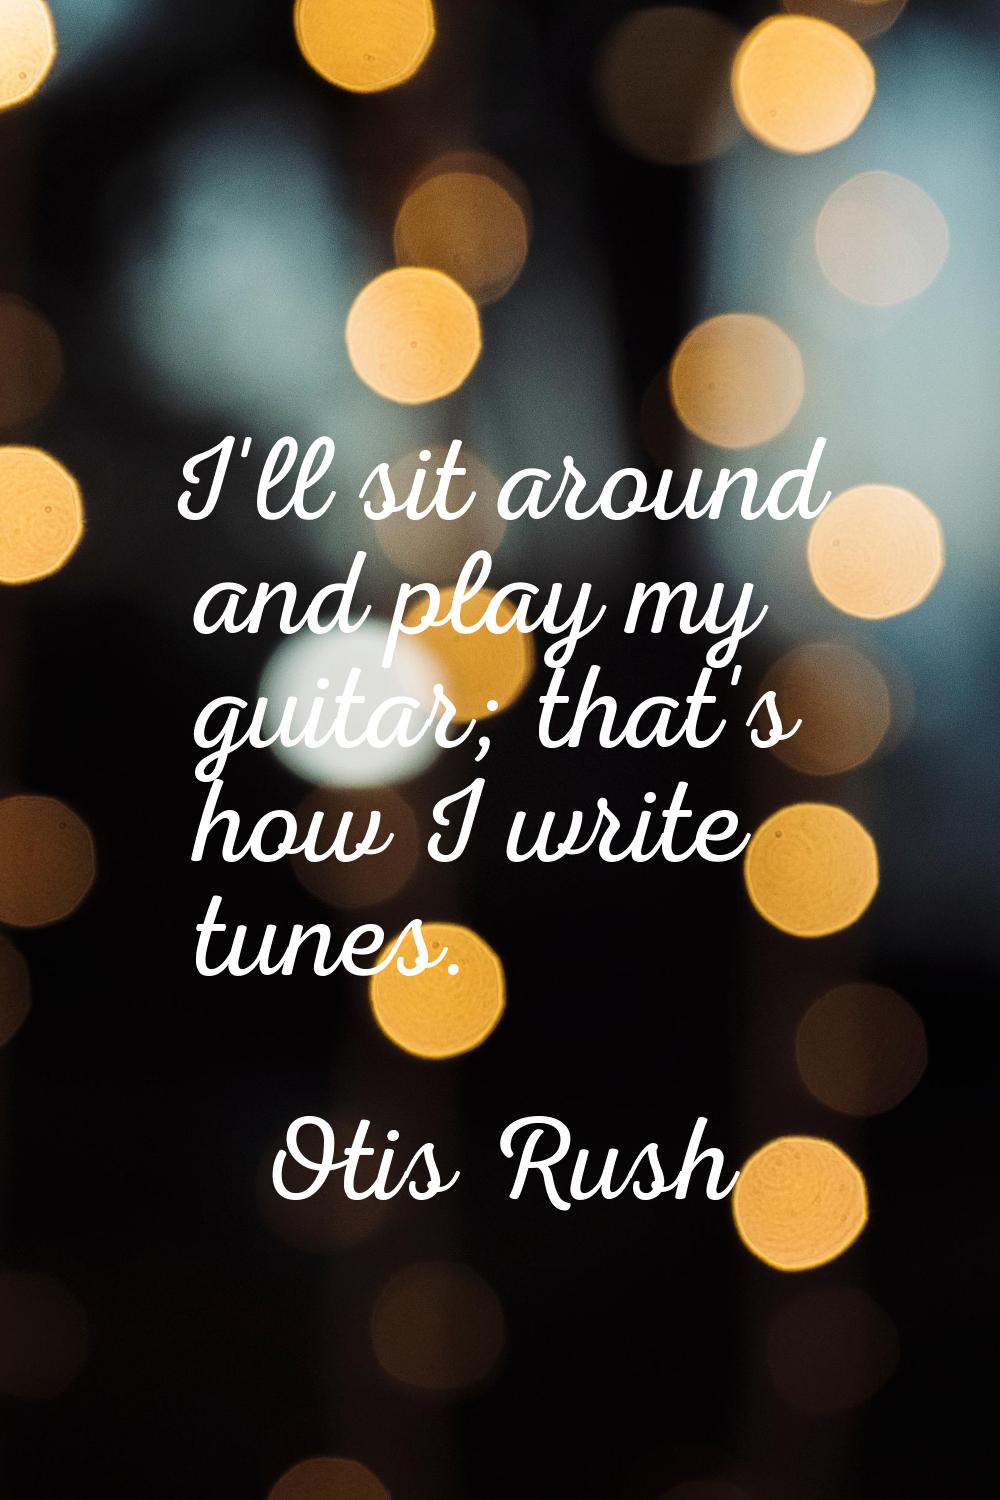 I'll sit around and play my guitar; that's how I write tunes.